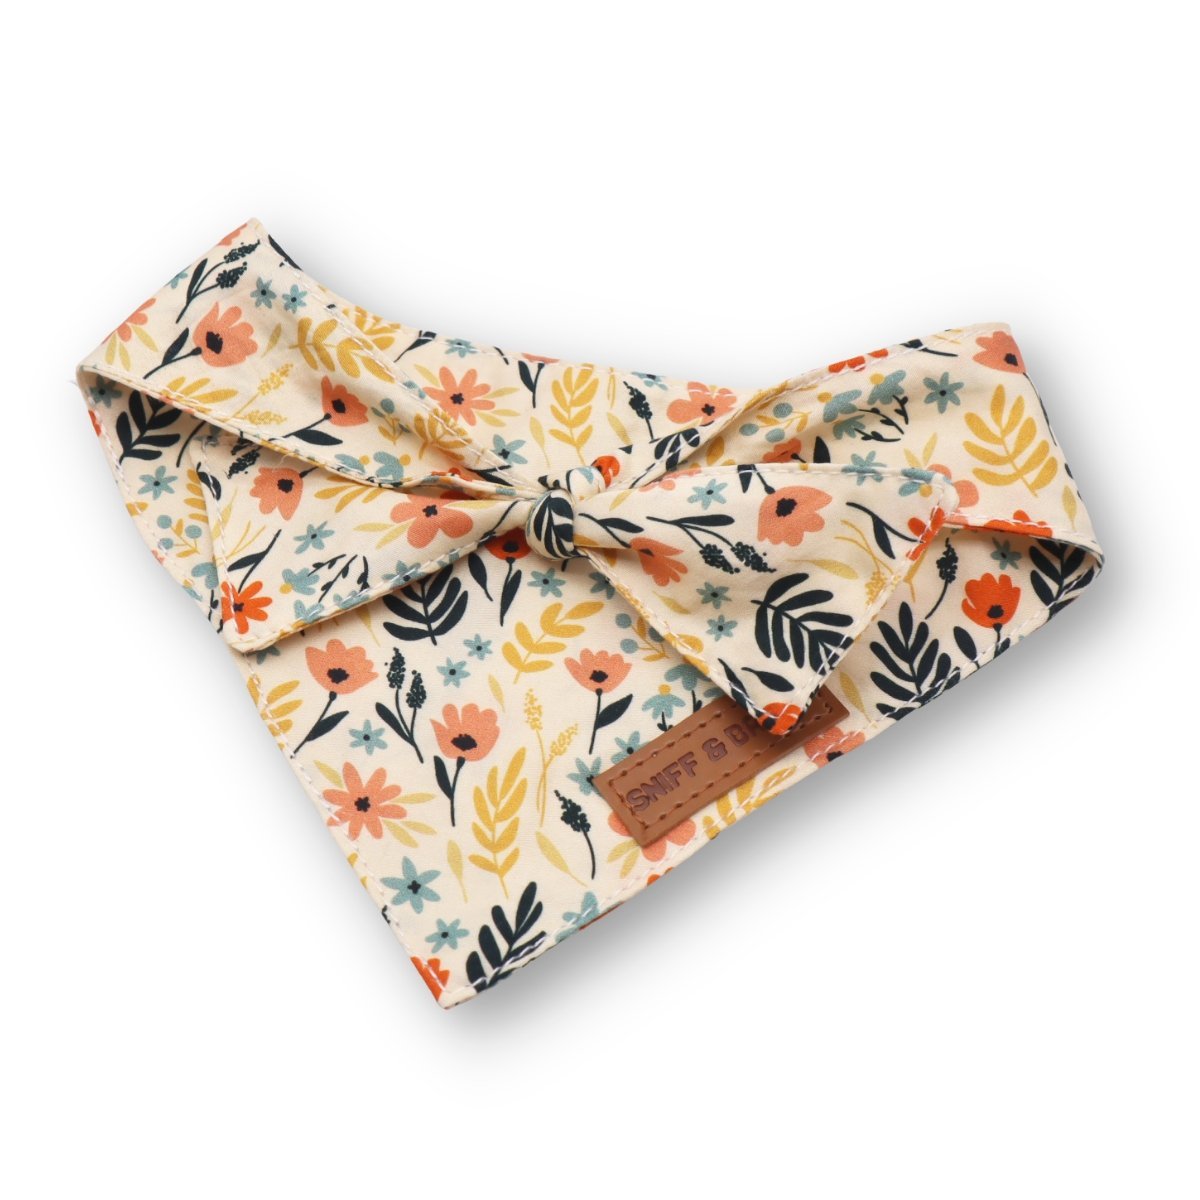 Cute Puppy Bandanas for Girls and Boys - Best Dog Bandanas - Dog Bandana Pattern - Floral Bandana